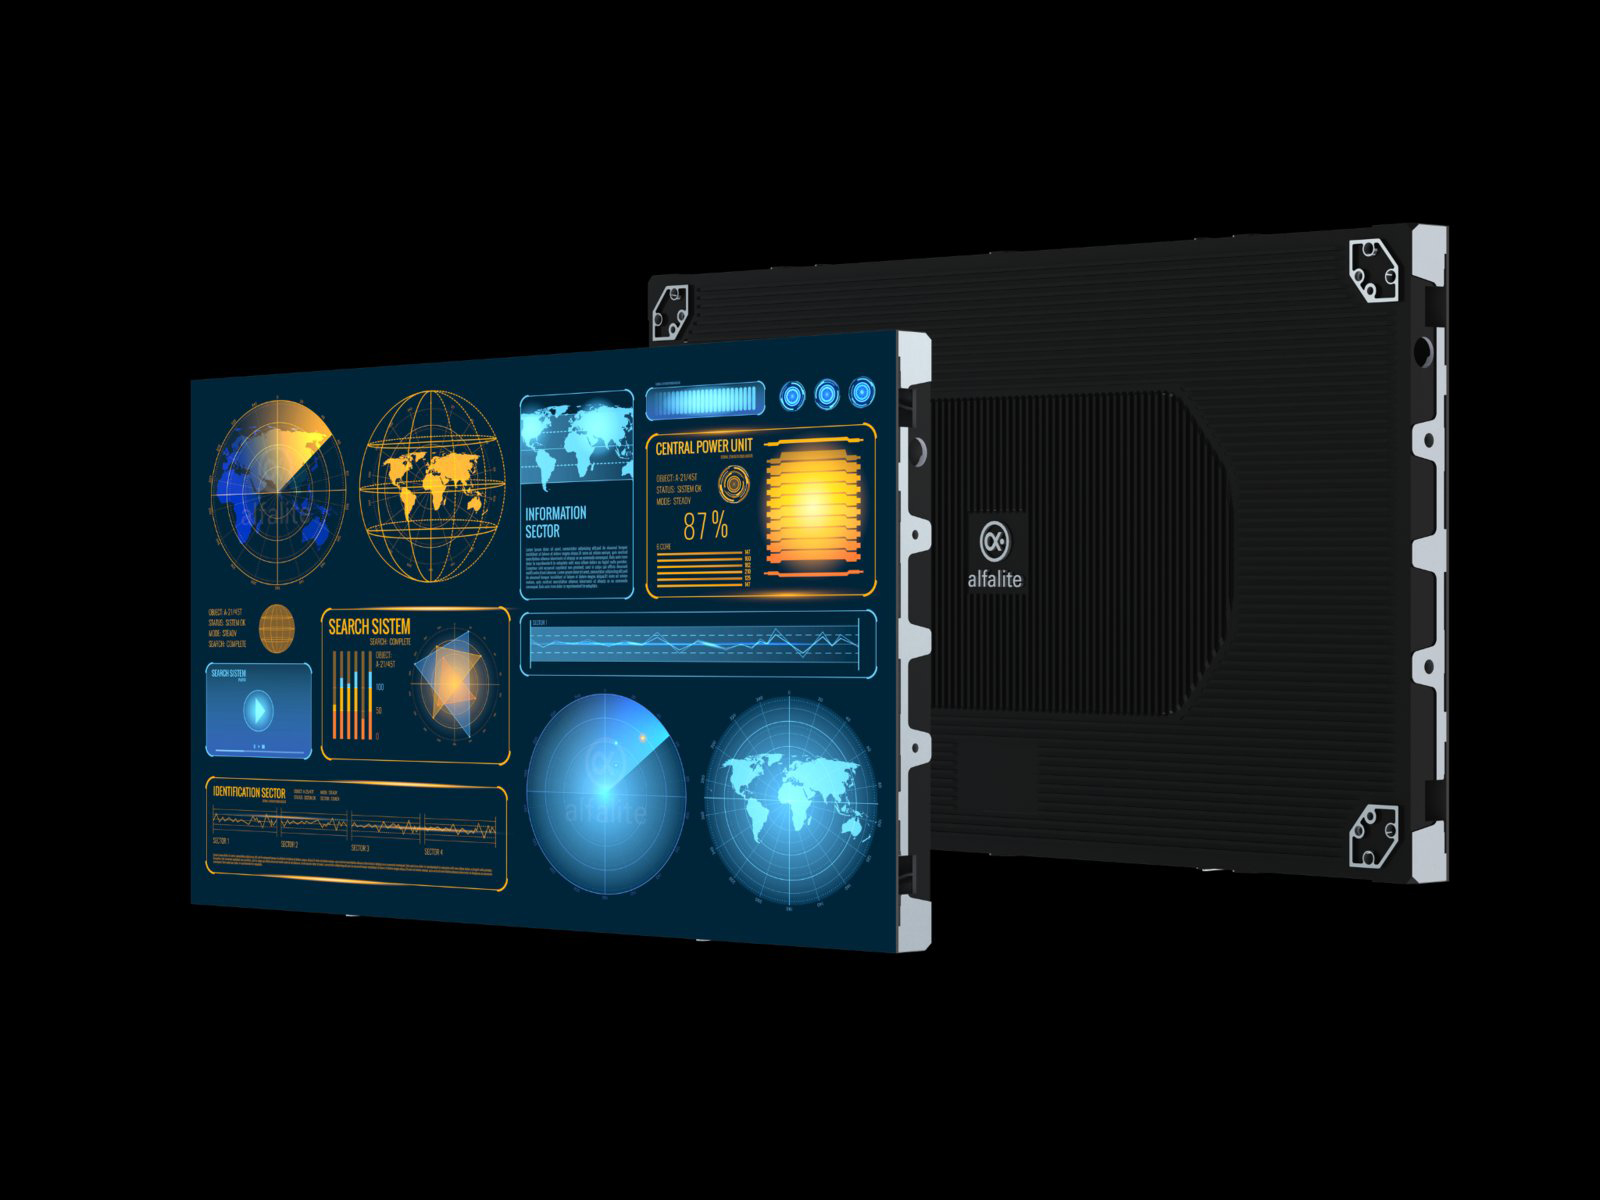 Alfalite introduces UHD Finepix LED panels with new AlfaCOB technology